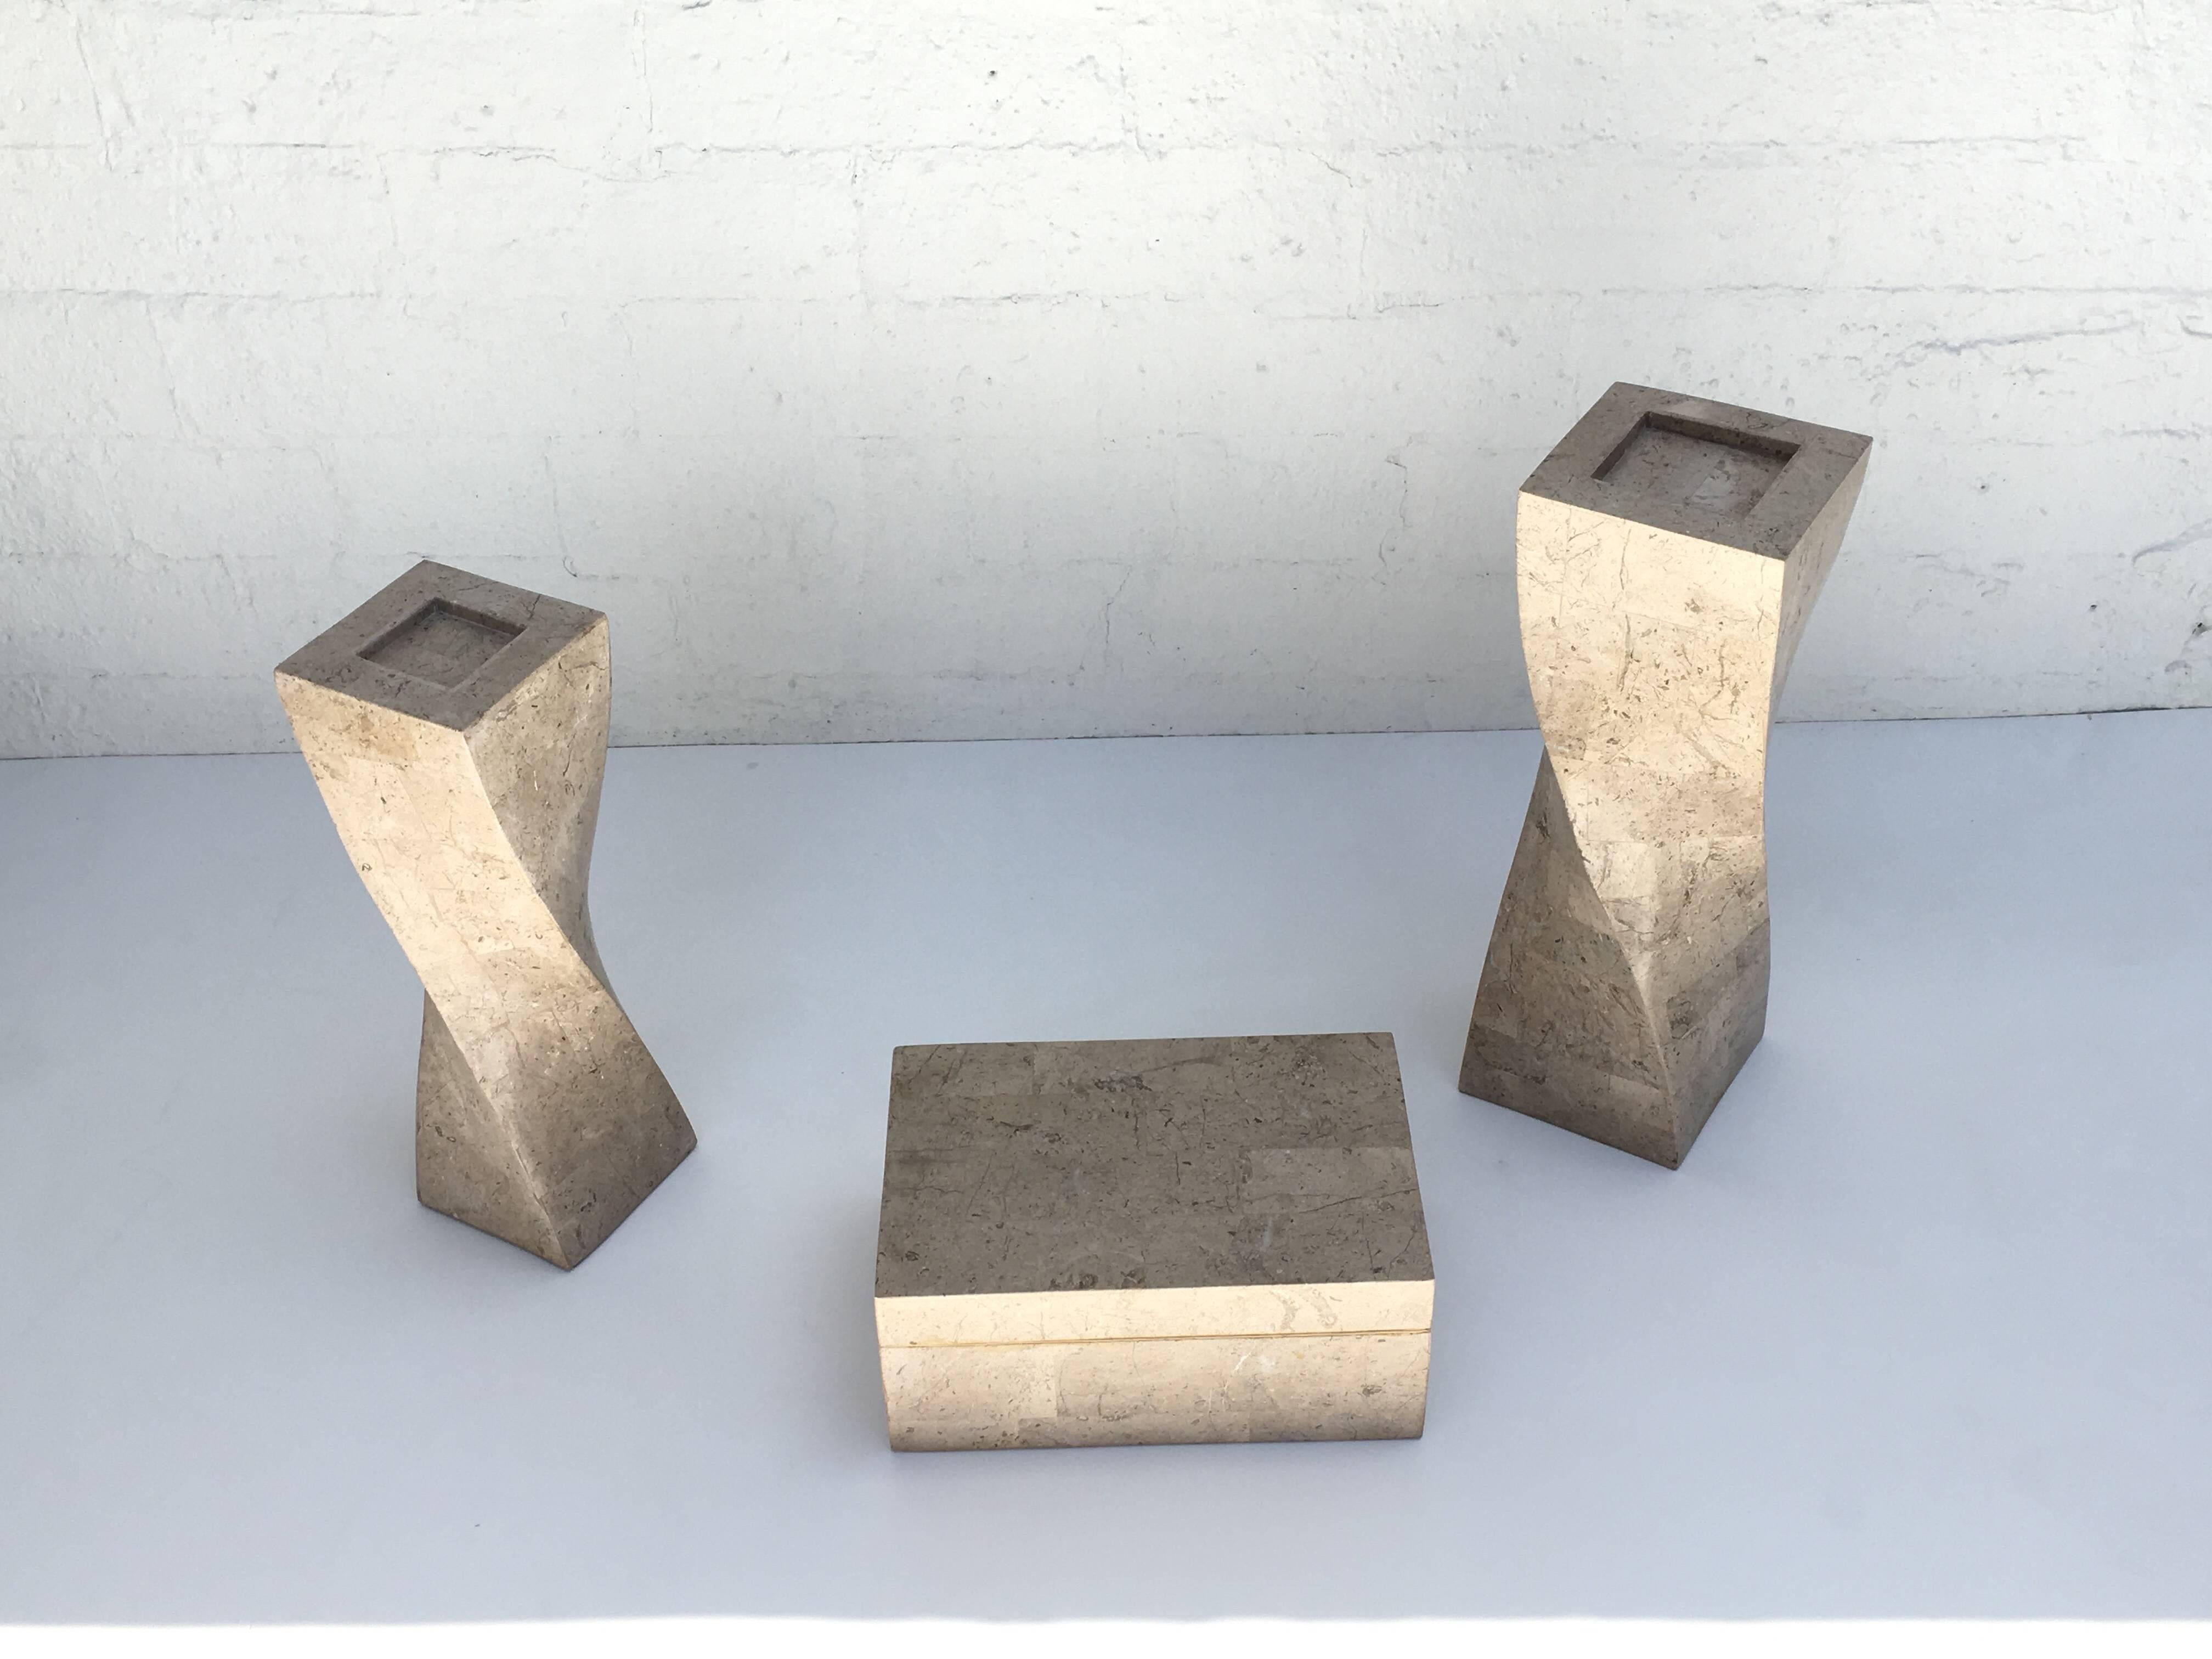 Late 20th Century Polished Travertine Box and Candlesticks by Maitland-Smith